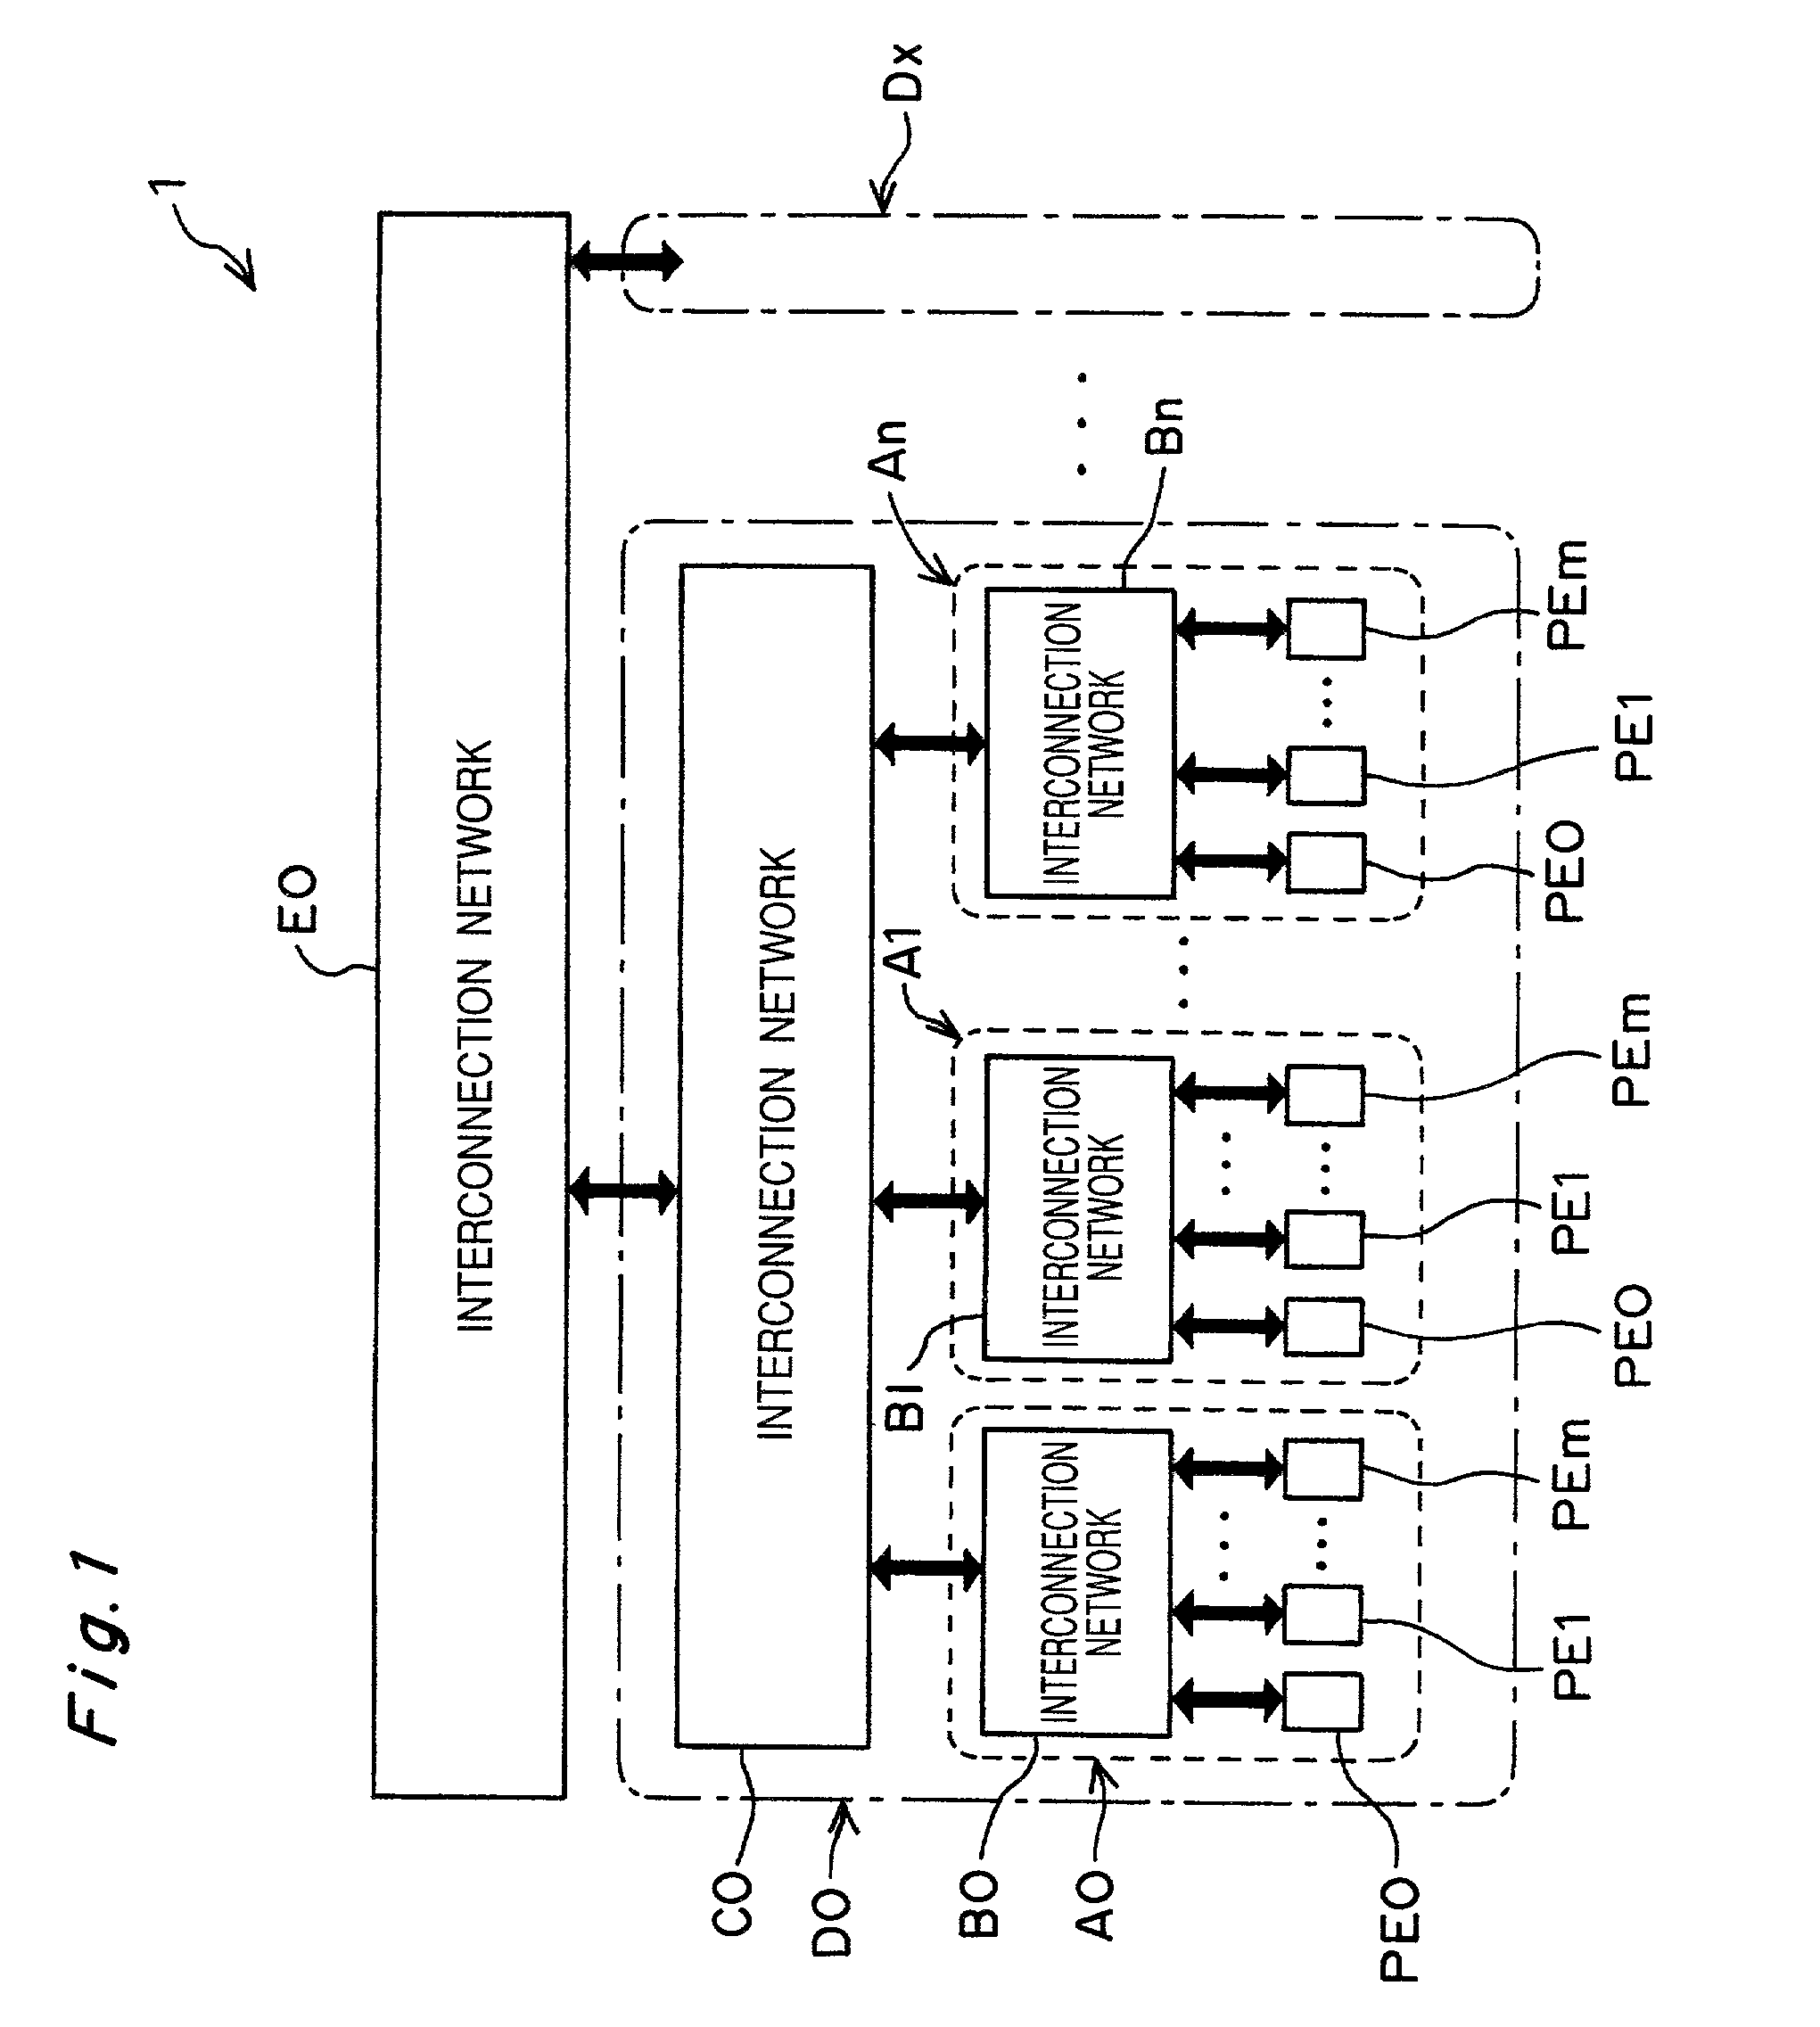 Multi-processor system apparatus allowing a compiler to conduct a static scheduling process over a large scale system of processors and memory modules